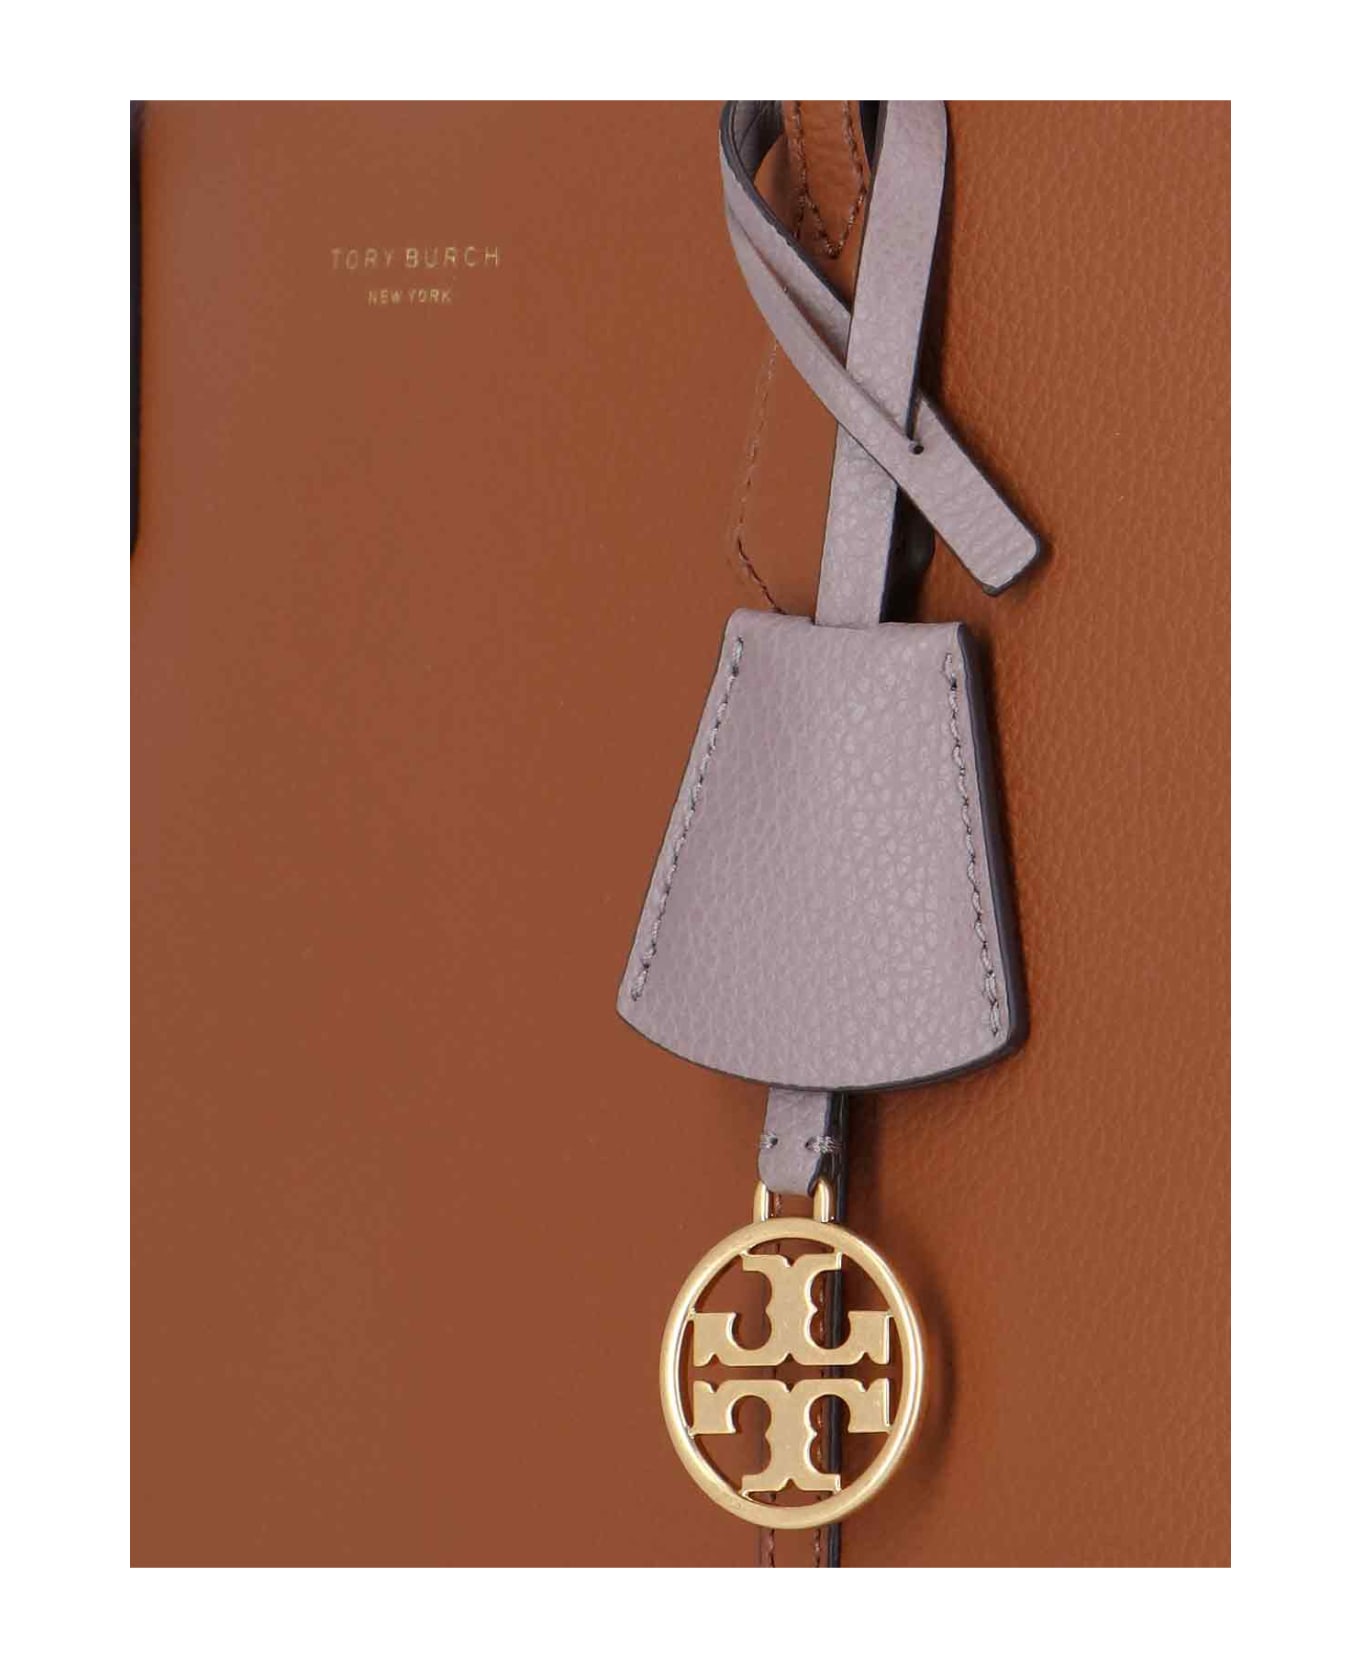 Tory Burch 'perry' Tote Bag - Brown トートバッグ